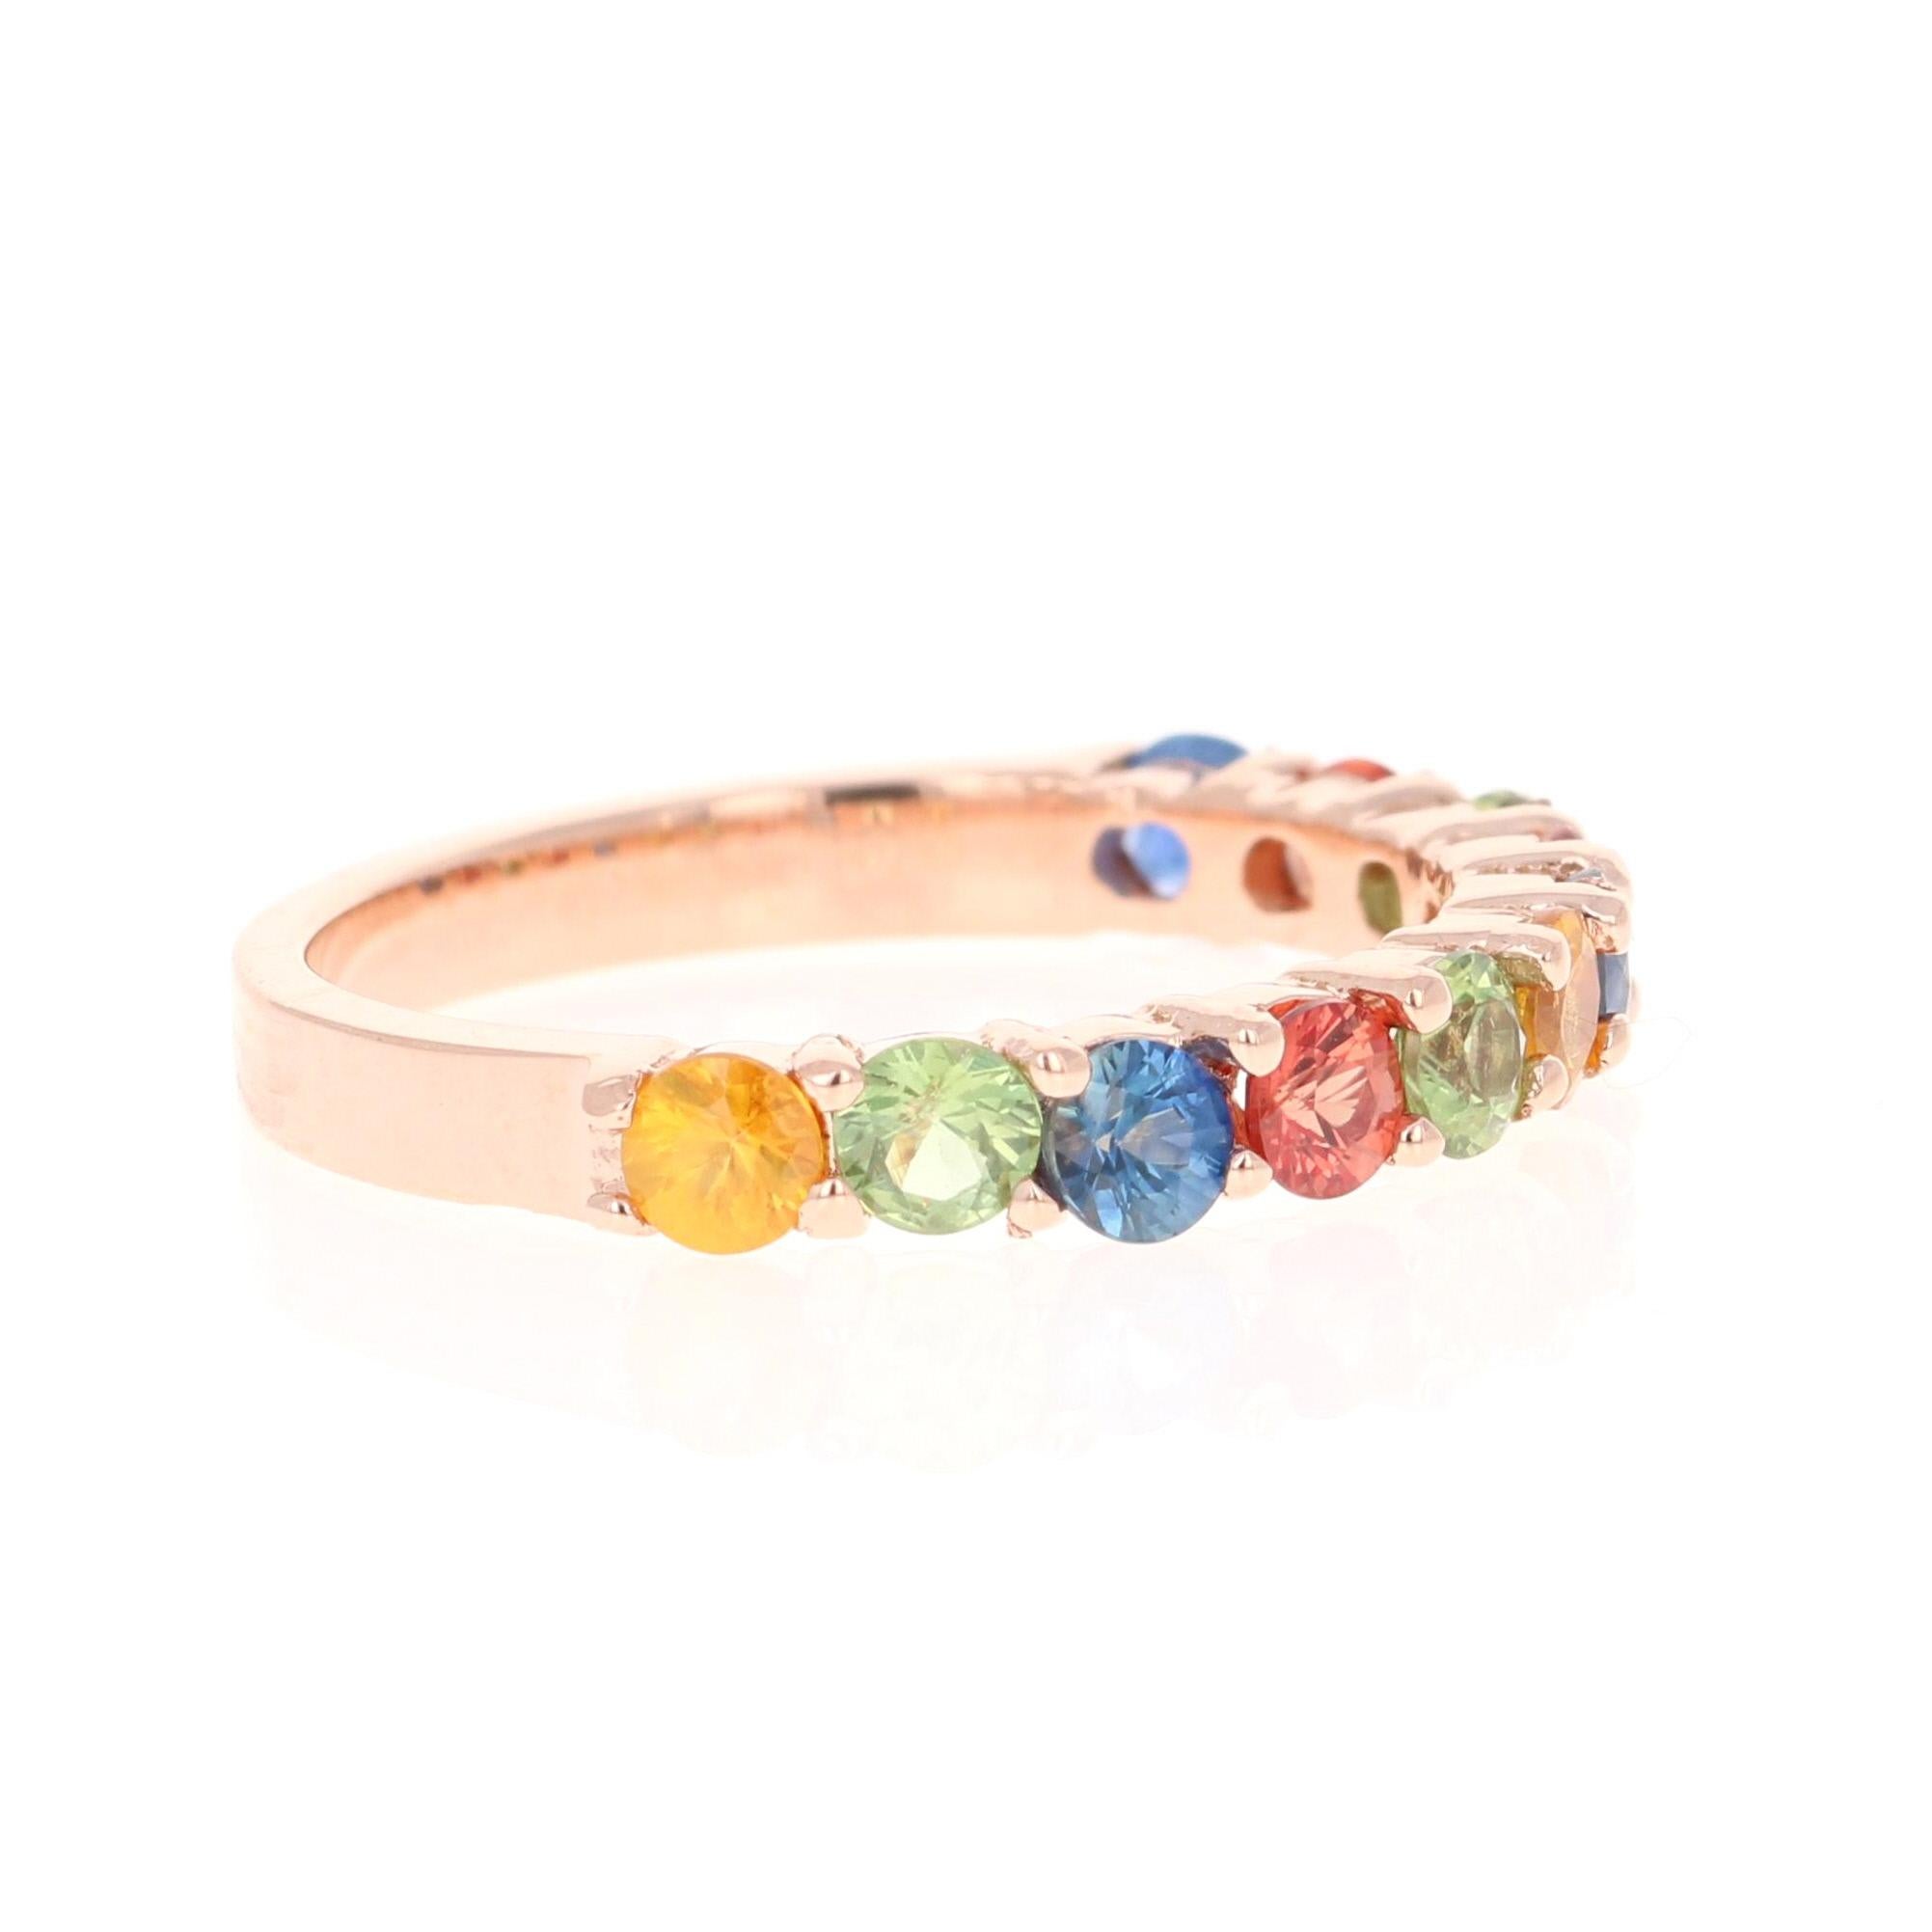 There are 11 Multicolored Genuine Sapphires in this band that weigh 1.85 Carats.  
It is perfect for everyday wear and looks amazing stacked or alone.  They are versatile and can jazz up to any outfit and occasion!  
This band is created in 14 Karat